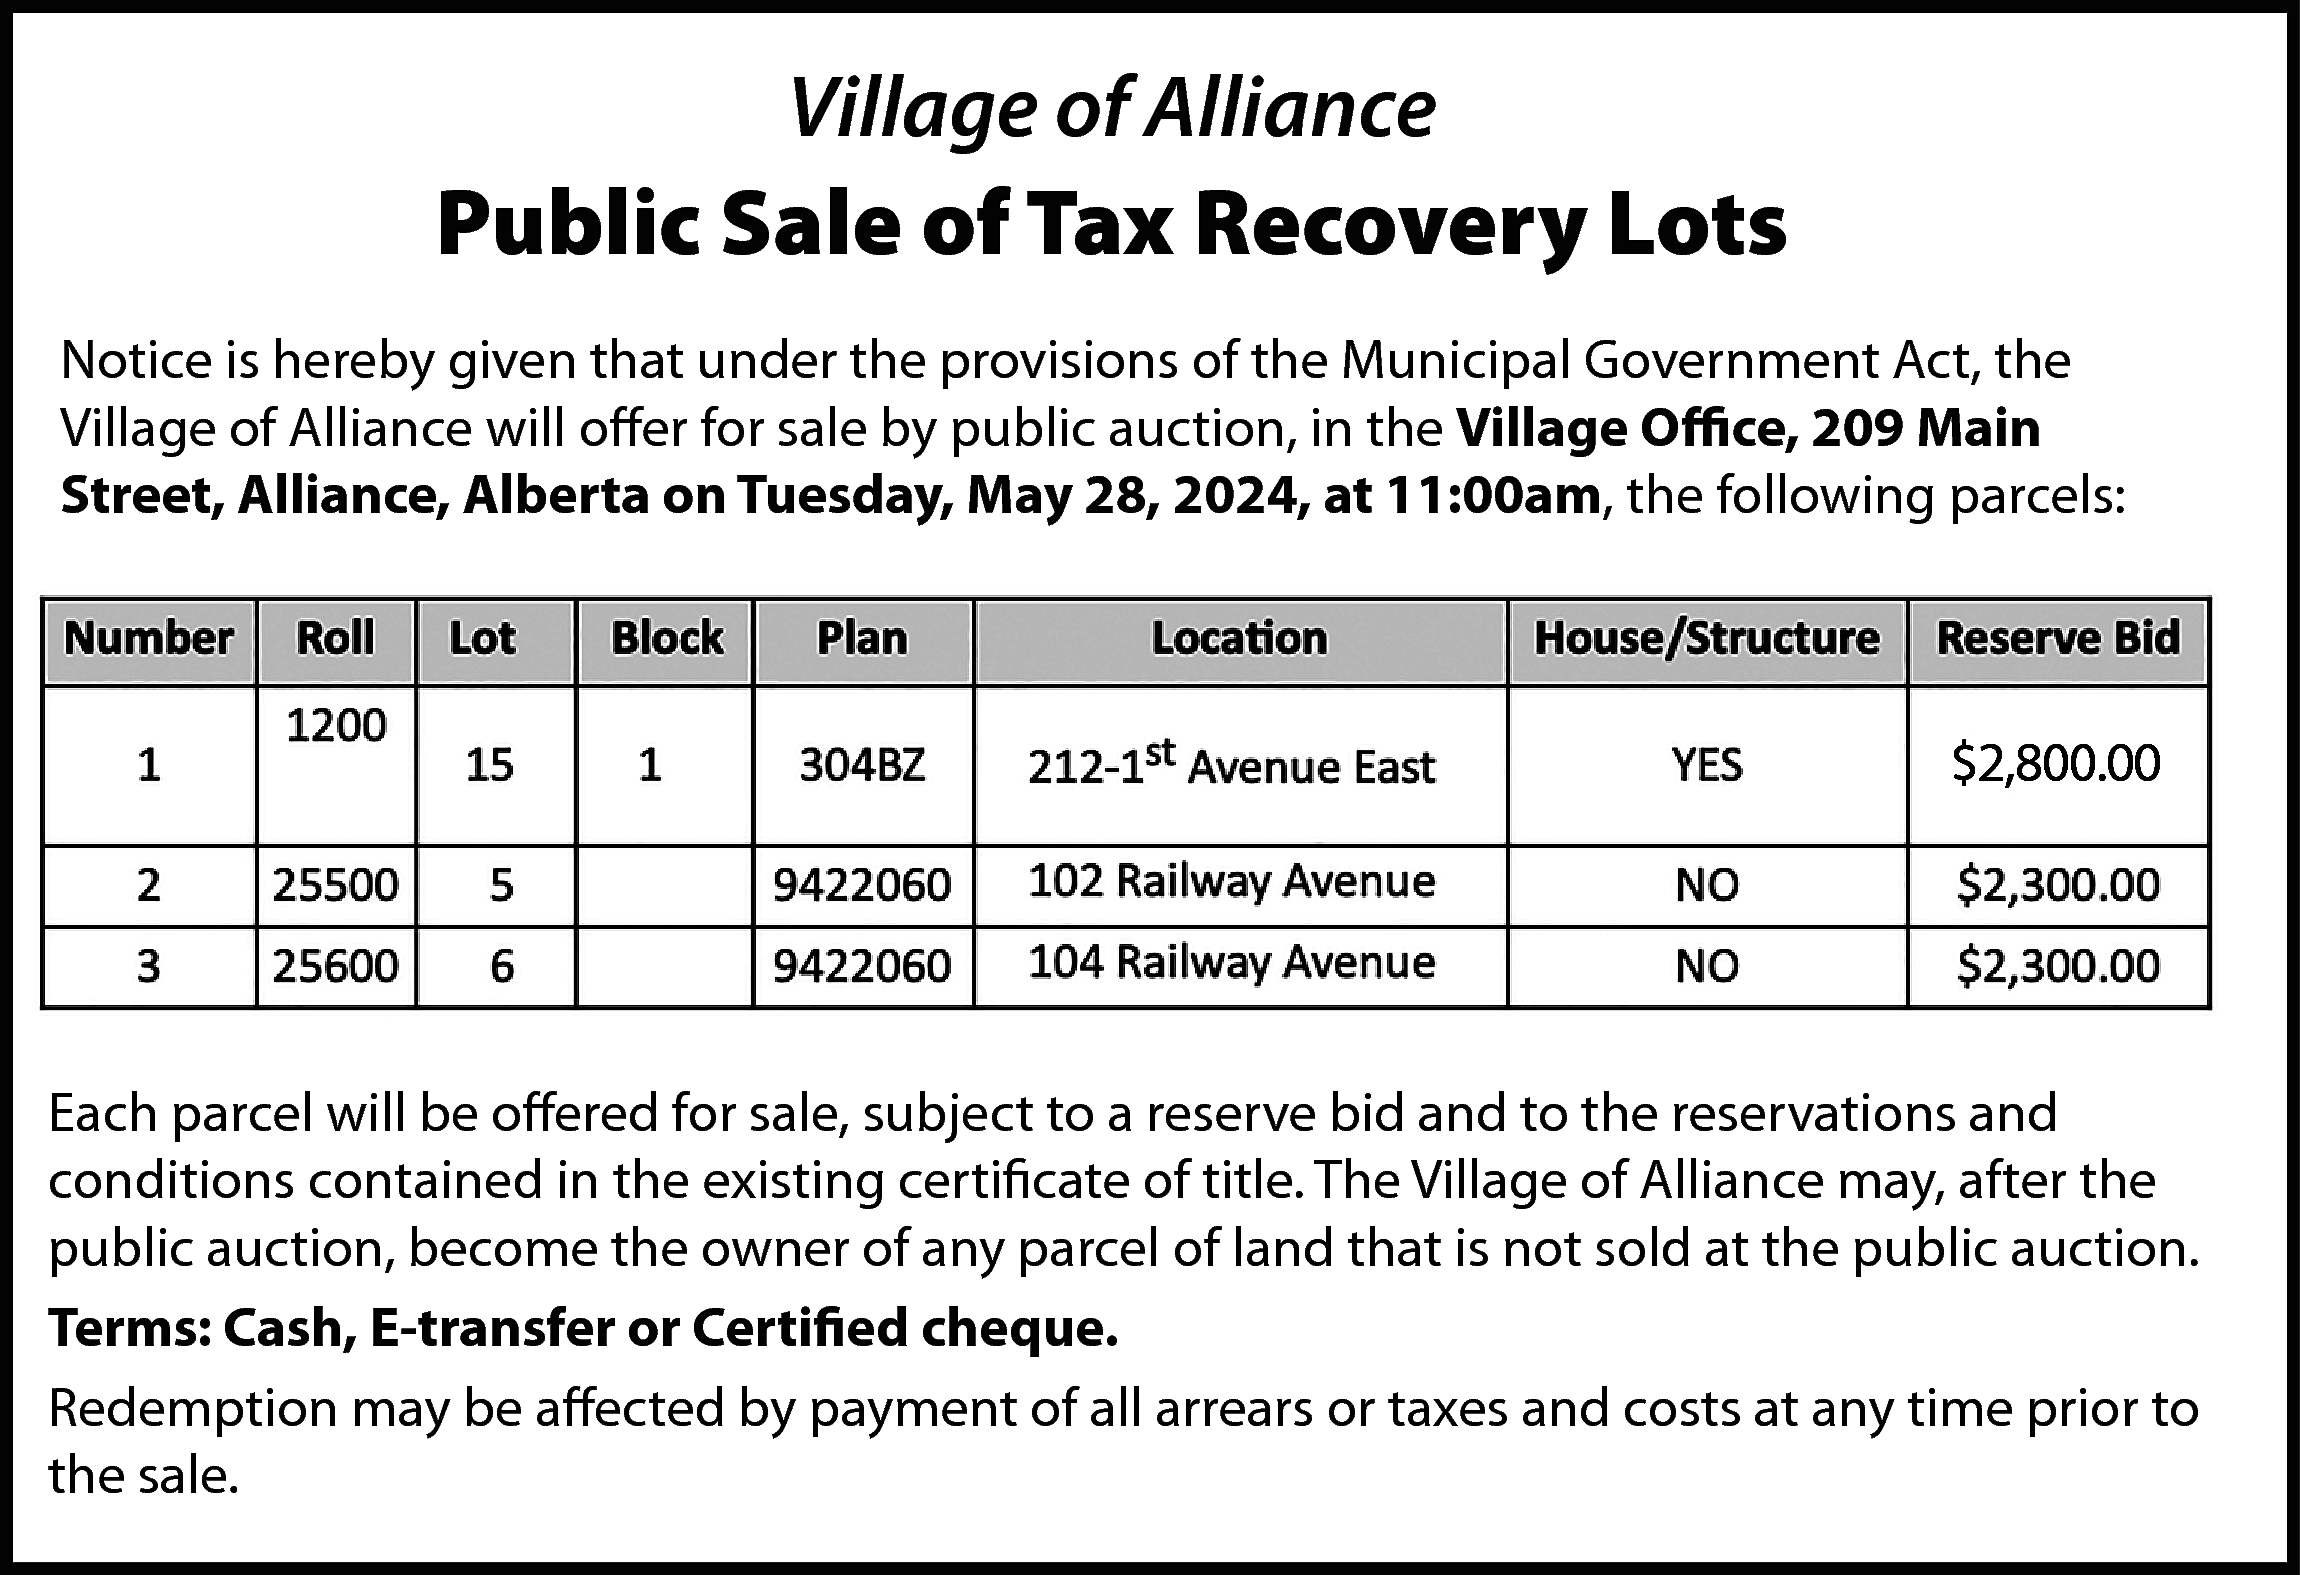 Village of Alliance <br> <br>Public  Village of Alliance    Public Sale of Tax Recovery Lots  Notice is hereby given that under the provisions of the Municipal Government Act, the  Village of Alliance will offer for sale by public auction, in the Village Office, 209 Main  Street, Alliance, Alberta on Tuesday, May 28, 2024, at 11:00am, the following parcels:    $2,800.00    Each parcel will be offered for sale, subject to a reserve bid and to the reservations and  conditions contained in the existing certificate of title. The Village of Alliance may, after the  public auction, become the owner of any parcel of land that is not sold at the public auction.  Terms: Cash, E-transfer or Certified cheque.  Redemption may be affected by payment of all arrears or taxes and costs at any time prior to  the sale.    